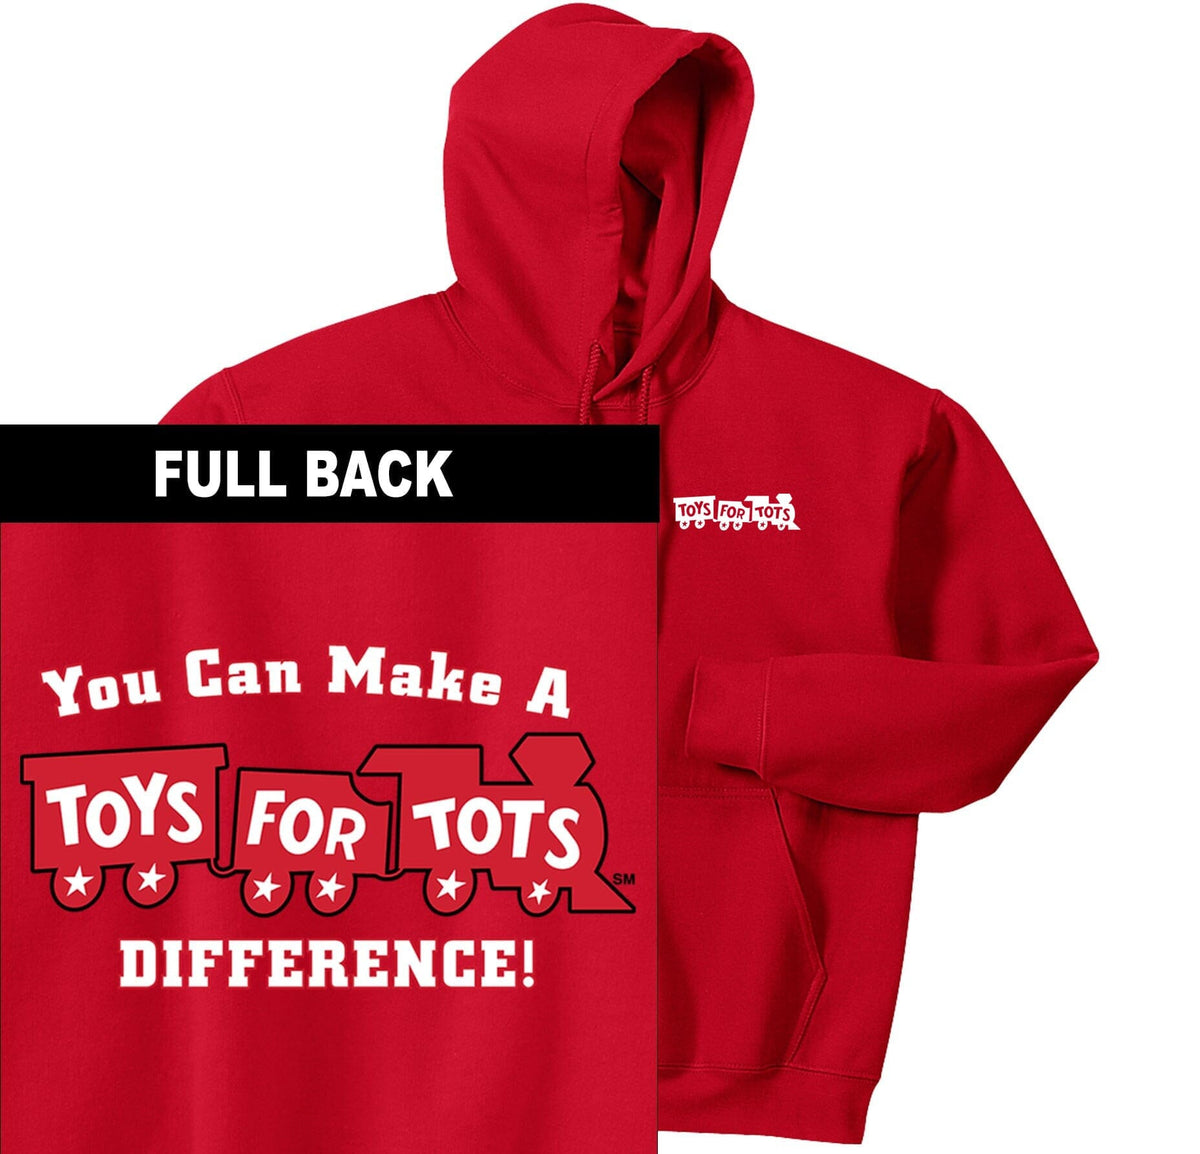 Make a Difference TFT Train 2-Sided Hoodie TFT Sweatshirt/hoodie marinecorpsdirecttft S RED 